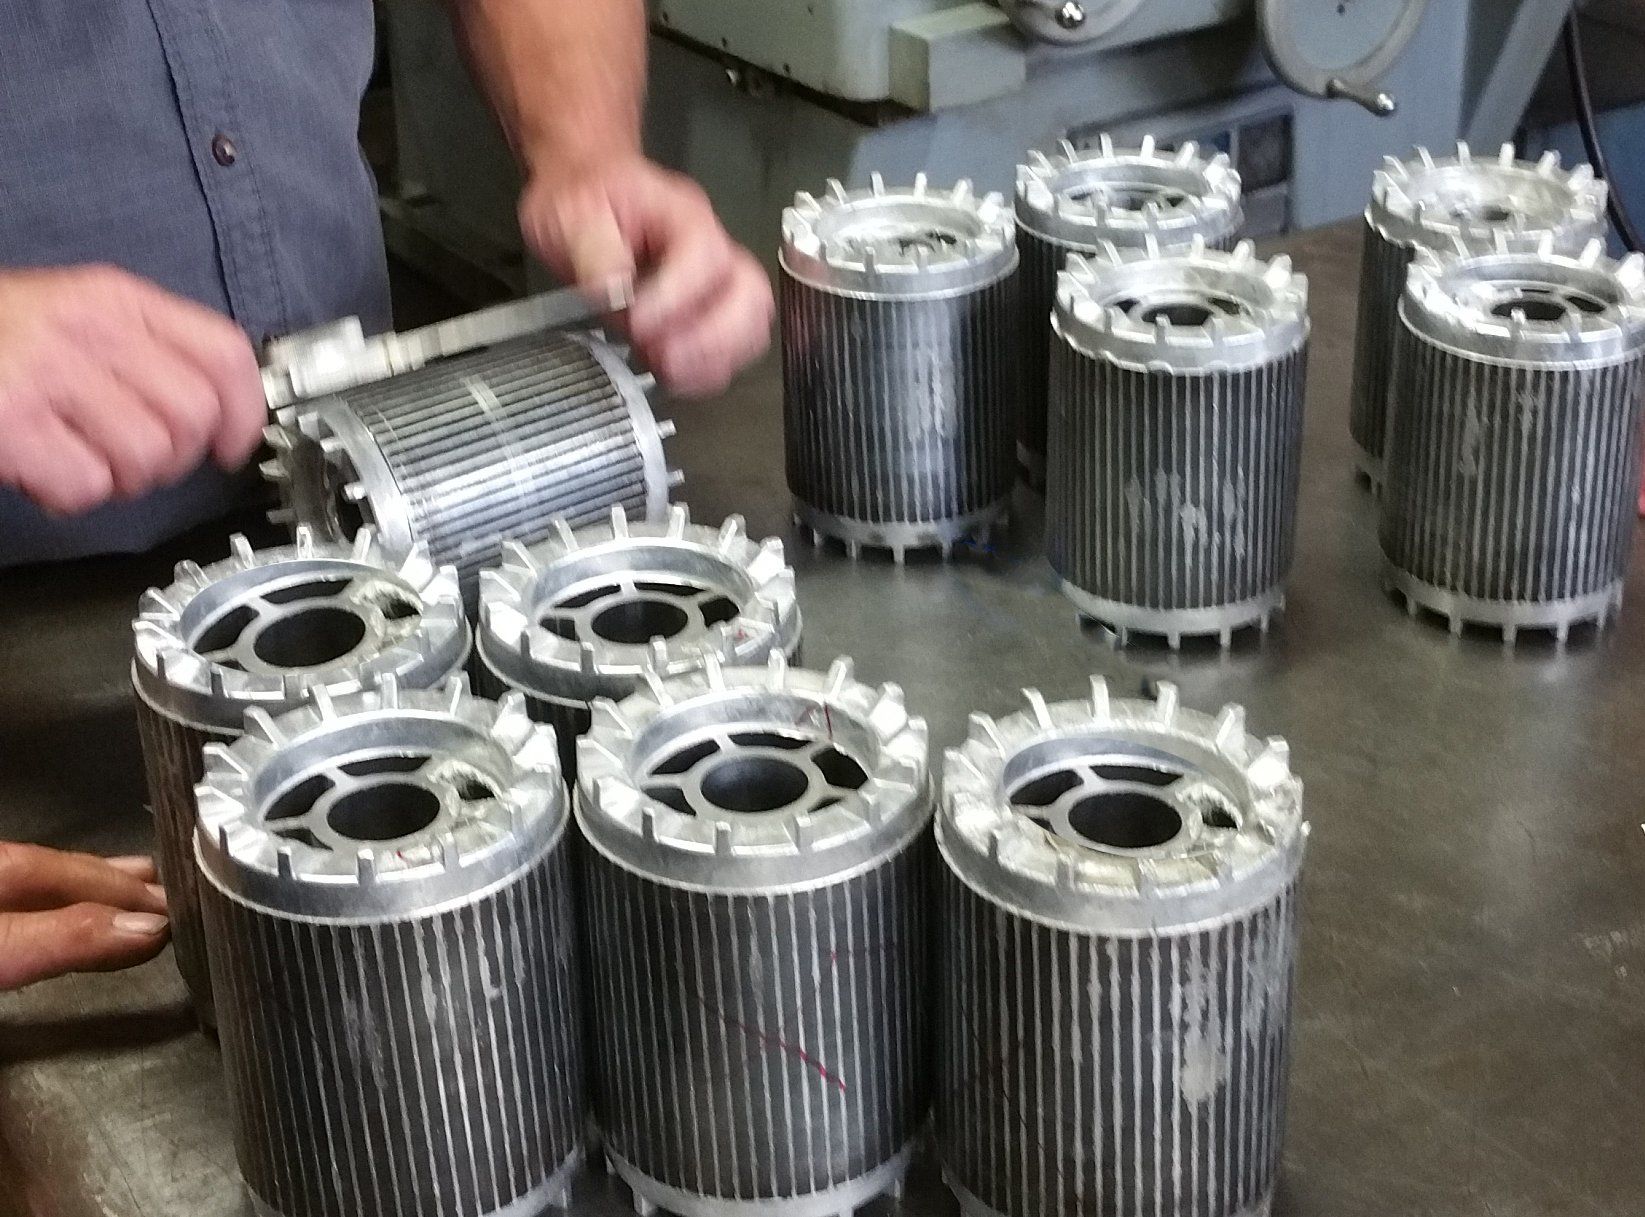 Rapid prototyping of cast rotors for aerospace application